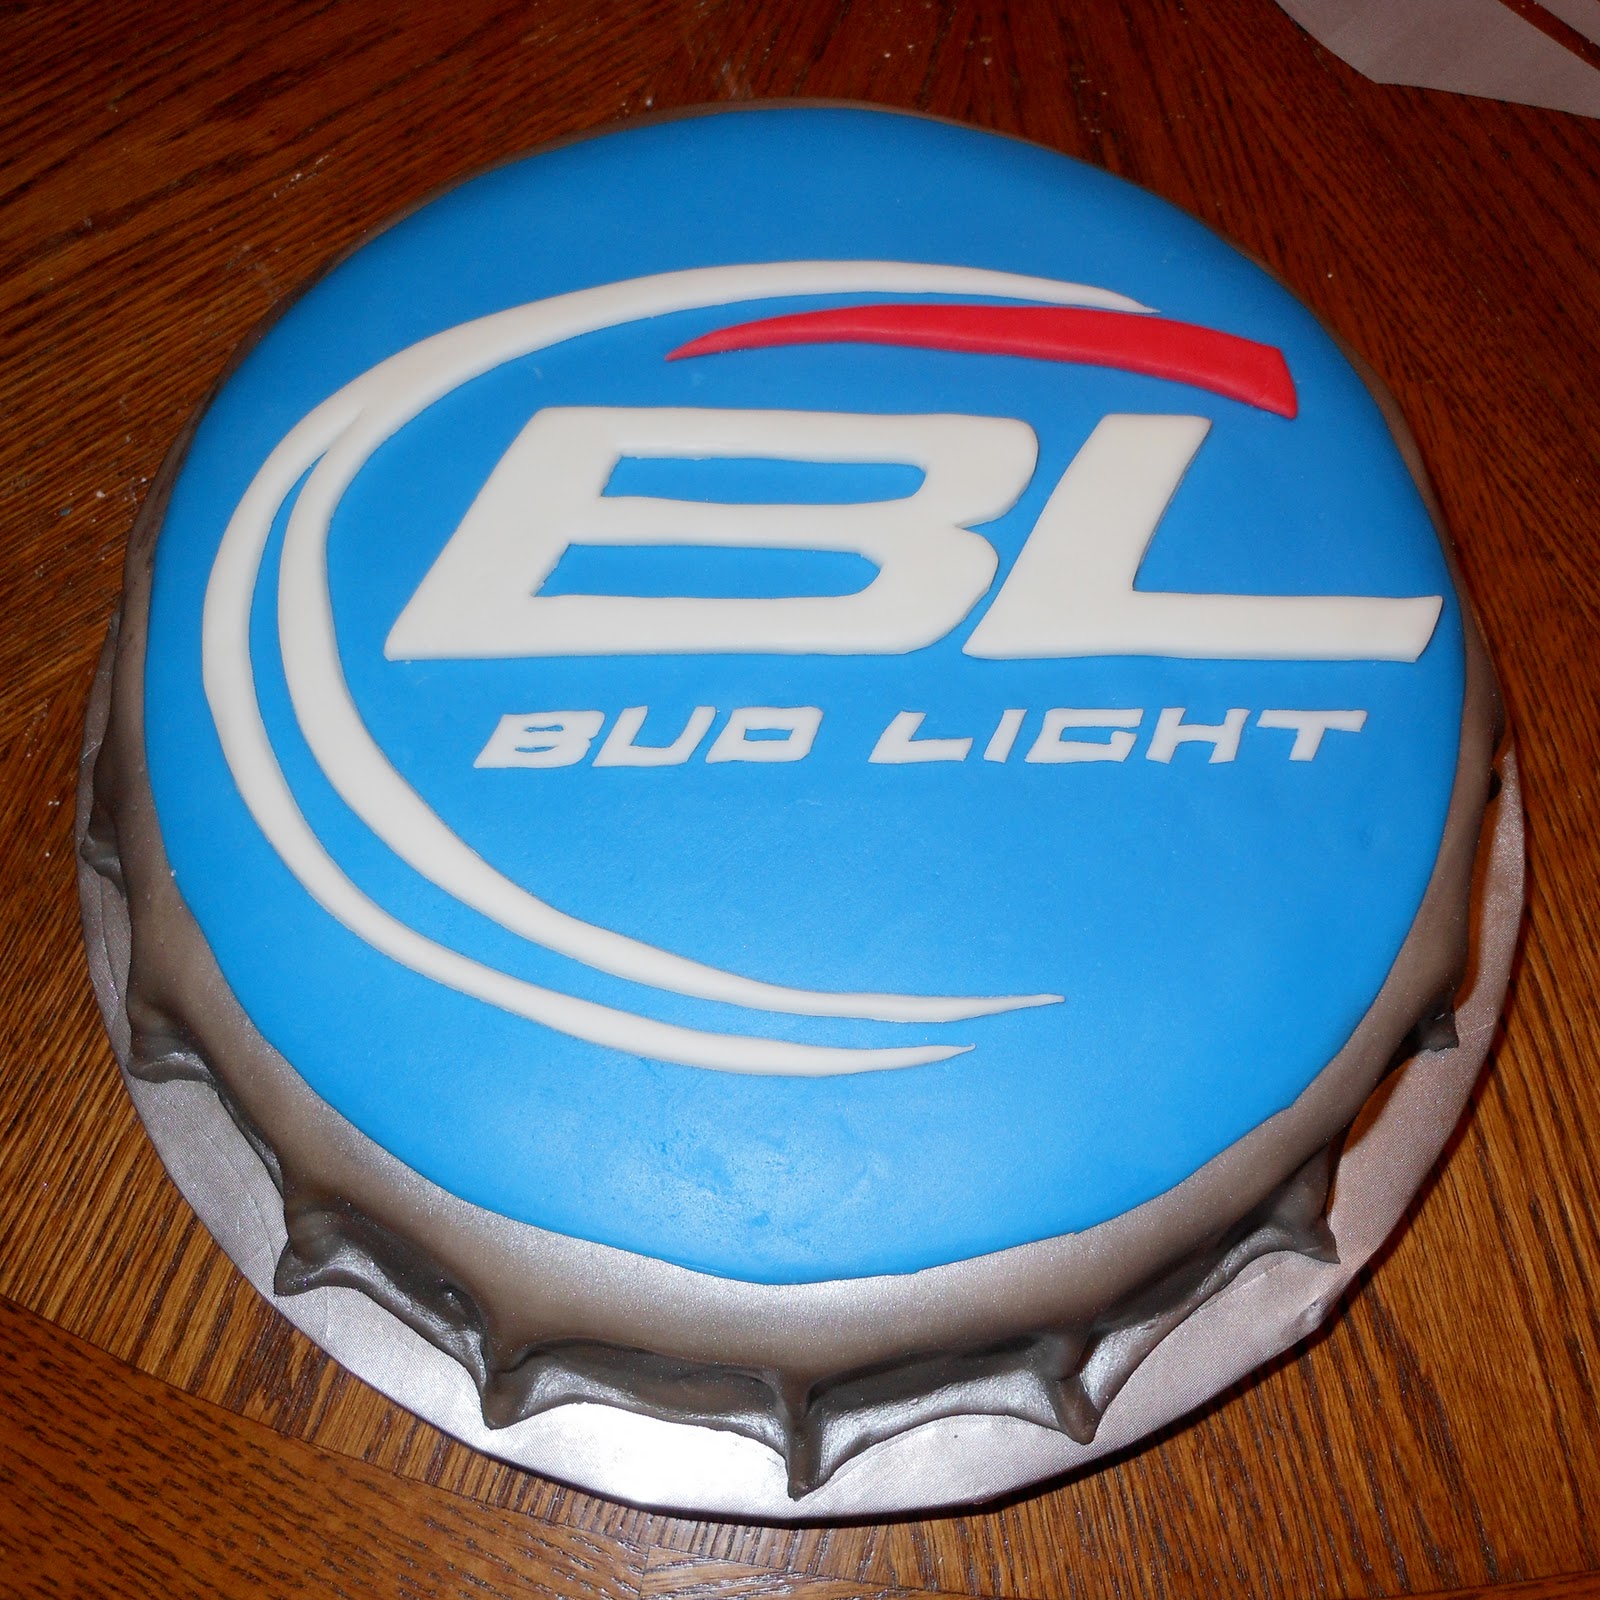 Bud Light Cakes Pictures.